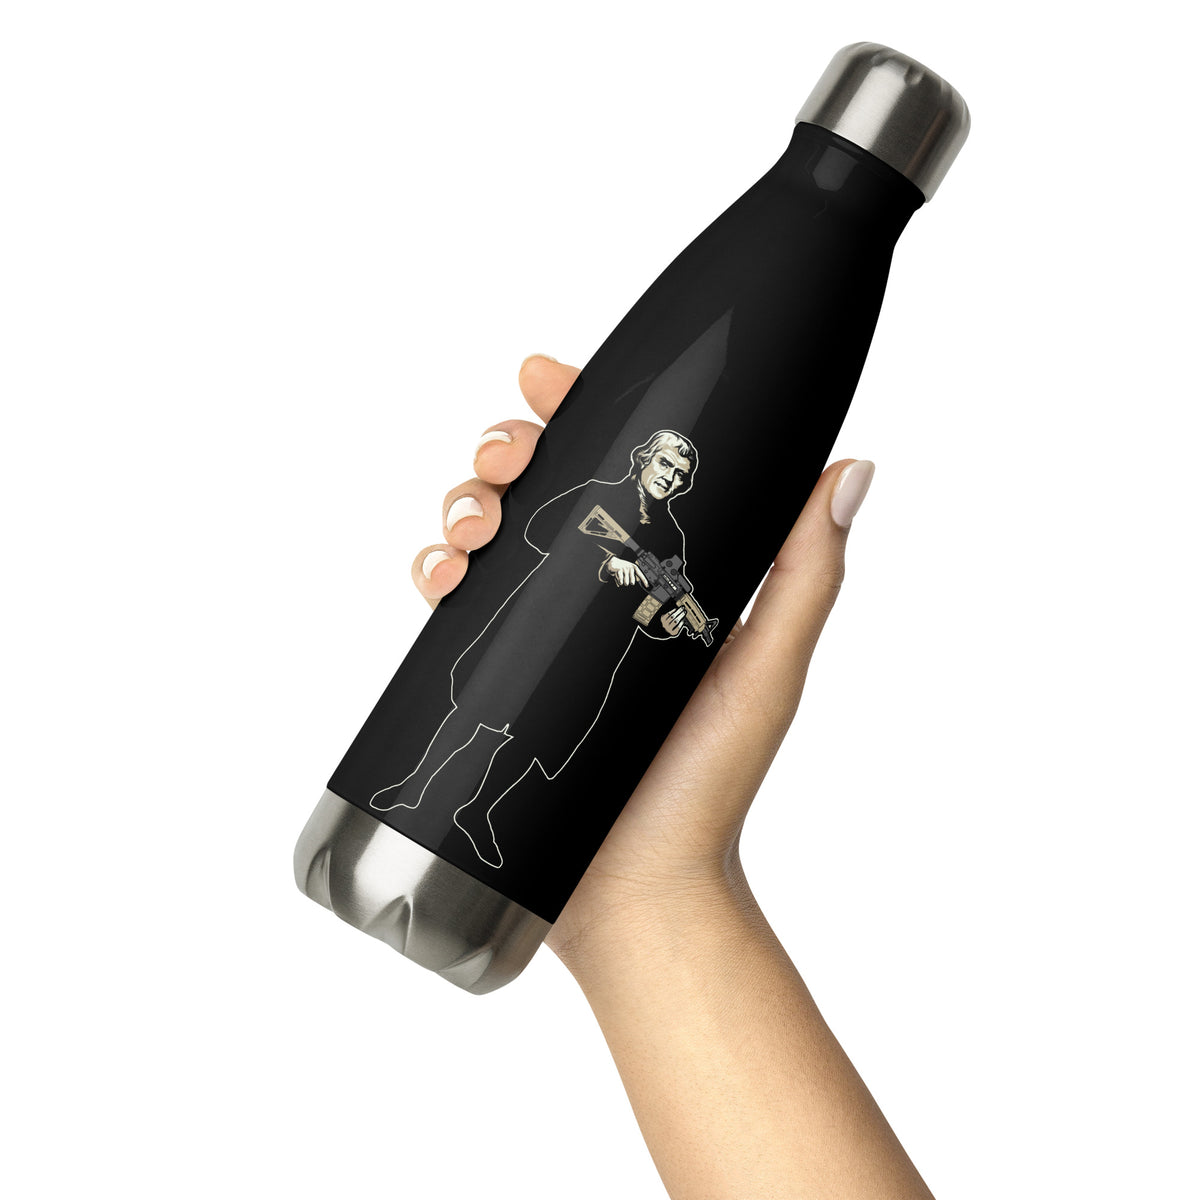 Liberty 12 oz. Deep Navy Insulated Stainless Steel Water Bottle